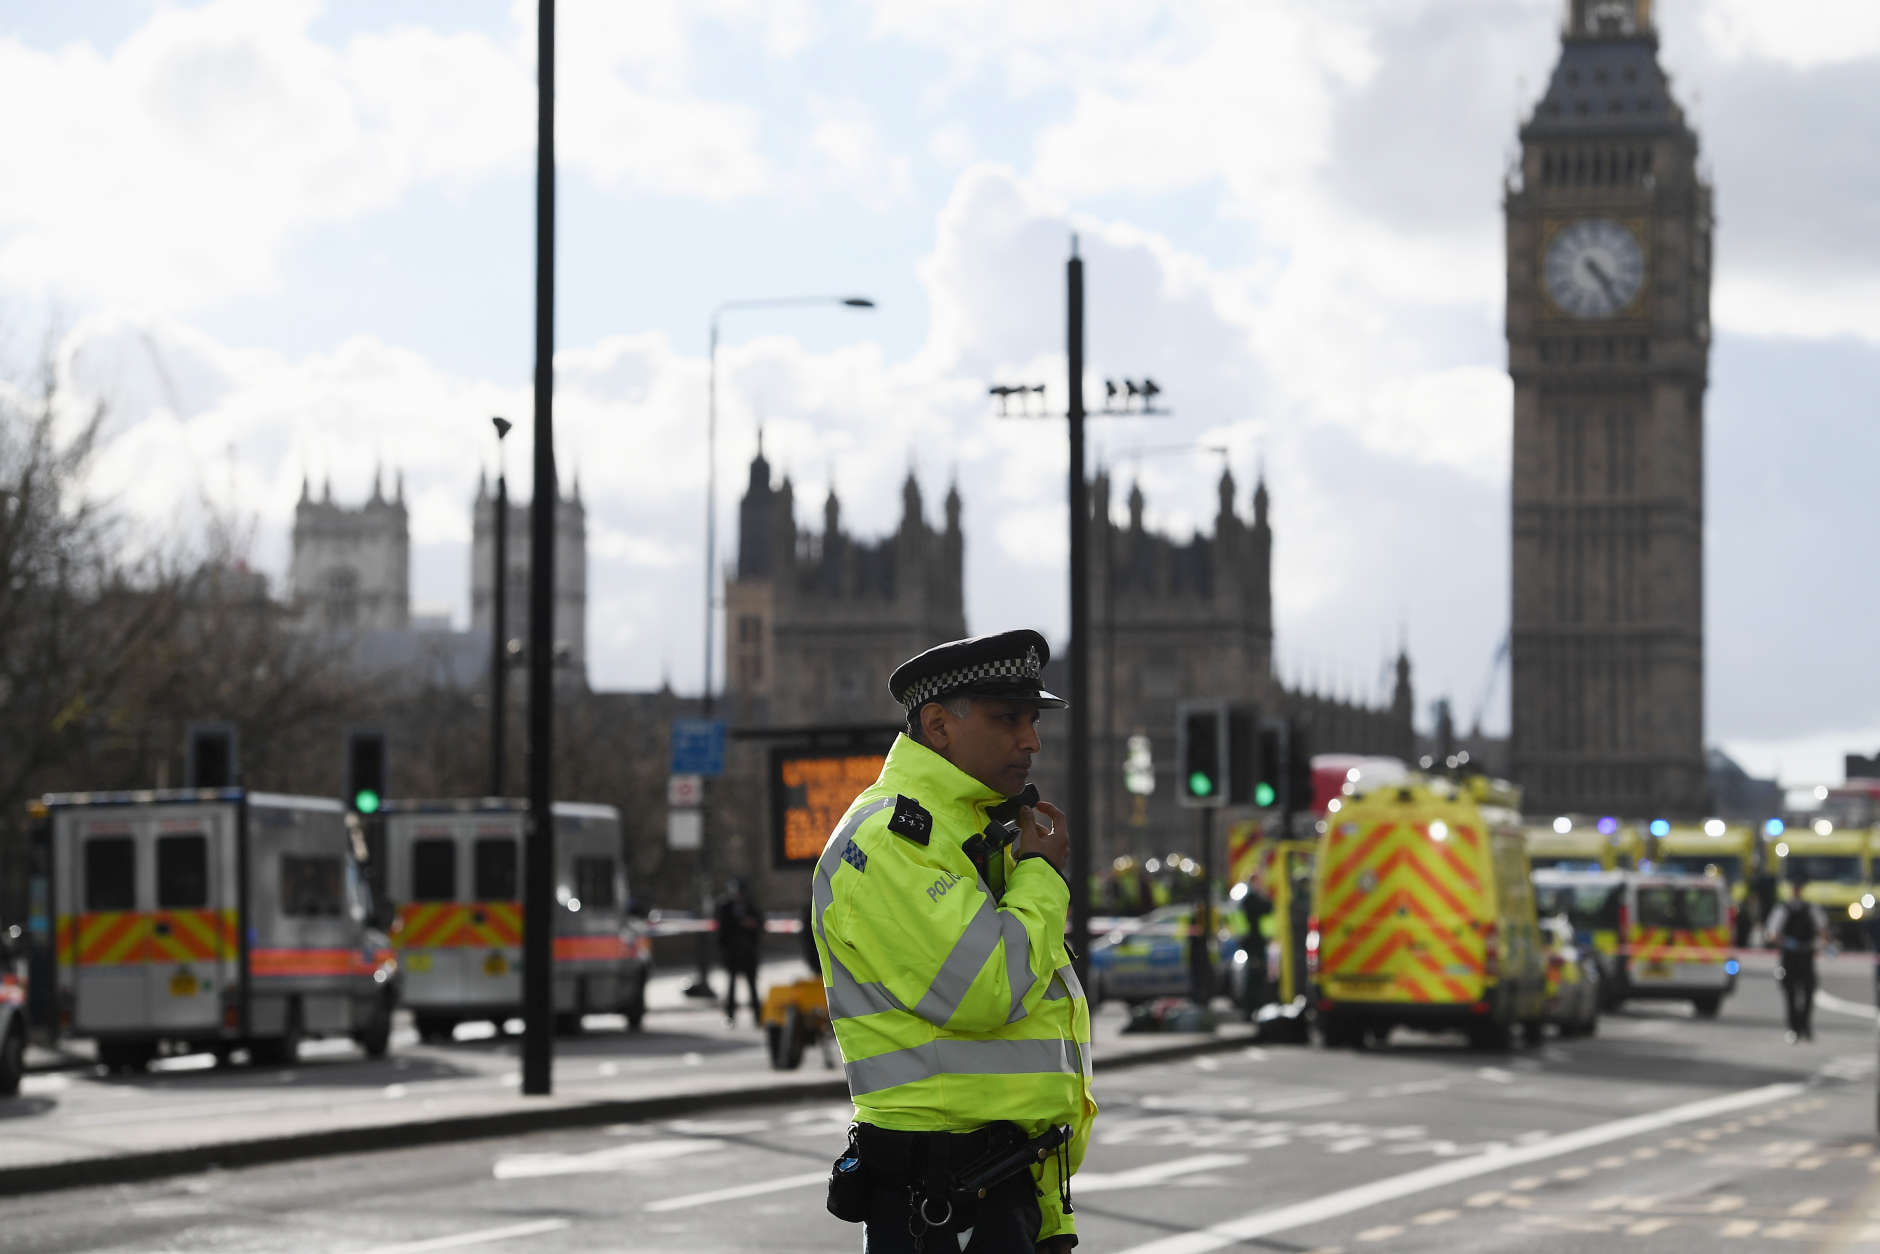 LONDON, ENGLAND - MARCH 22:  Ambulances, police vehicles and emergency services seen on Westminster Bridge on March 22, 2017 in London, England. A police officer was stabbed near to the British Parliament and the alleged assailant shot by armed police. Scotland Yard also reported an incident on Westminster Bridge where one woman has been killed and several people seriously injured by a car.  (Photo by Carl Court/Getty Images)